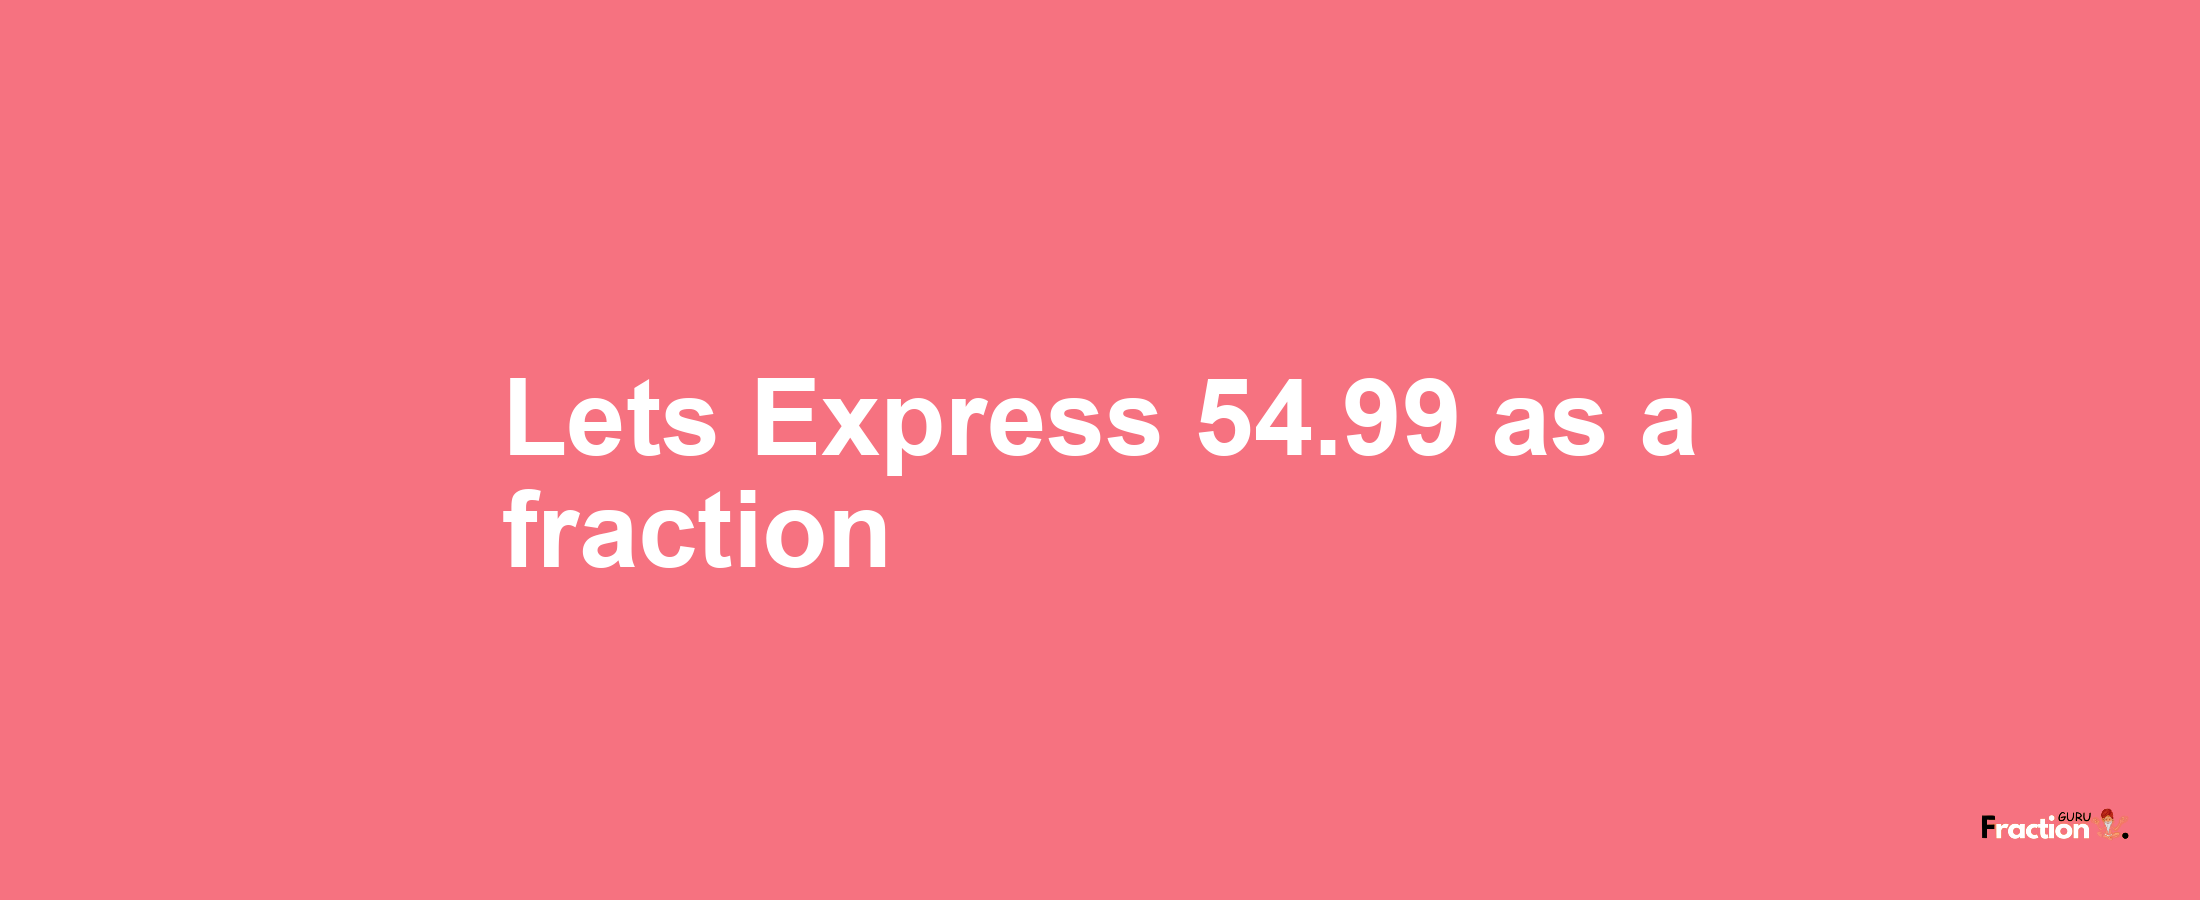 Lets Express 54.99 as afraction